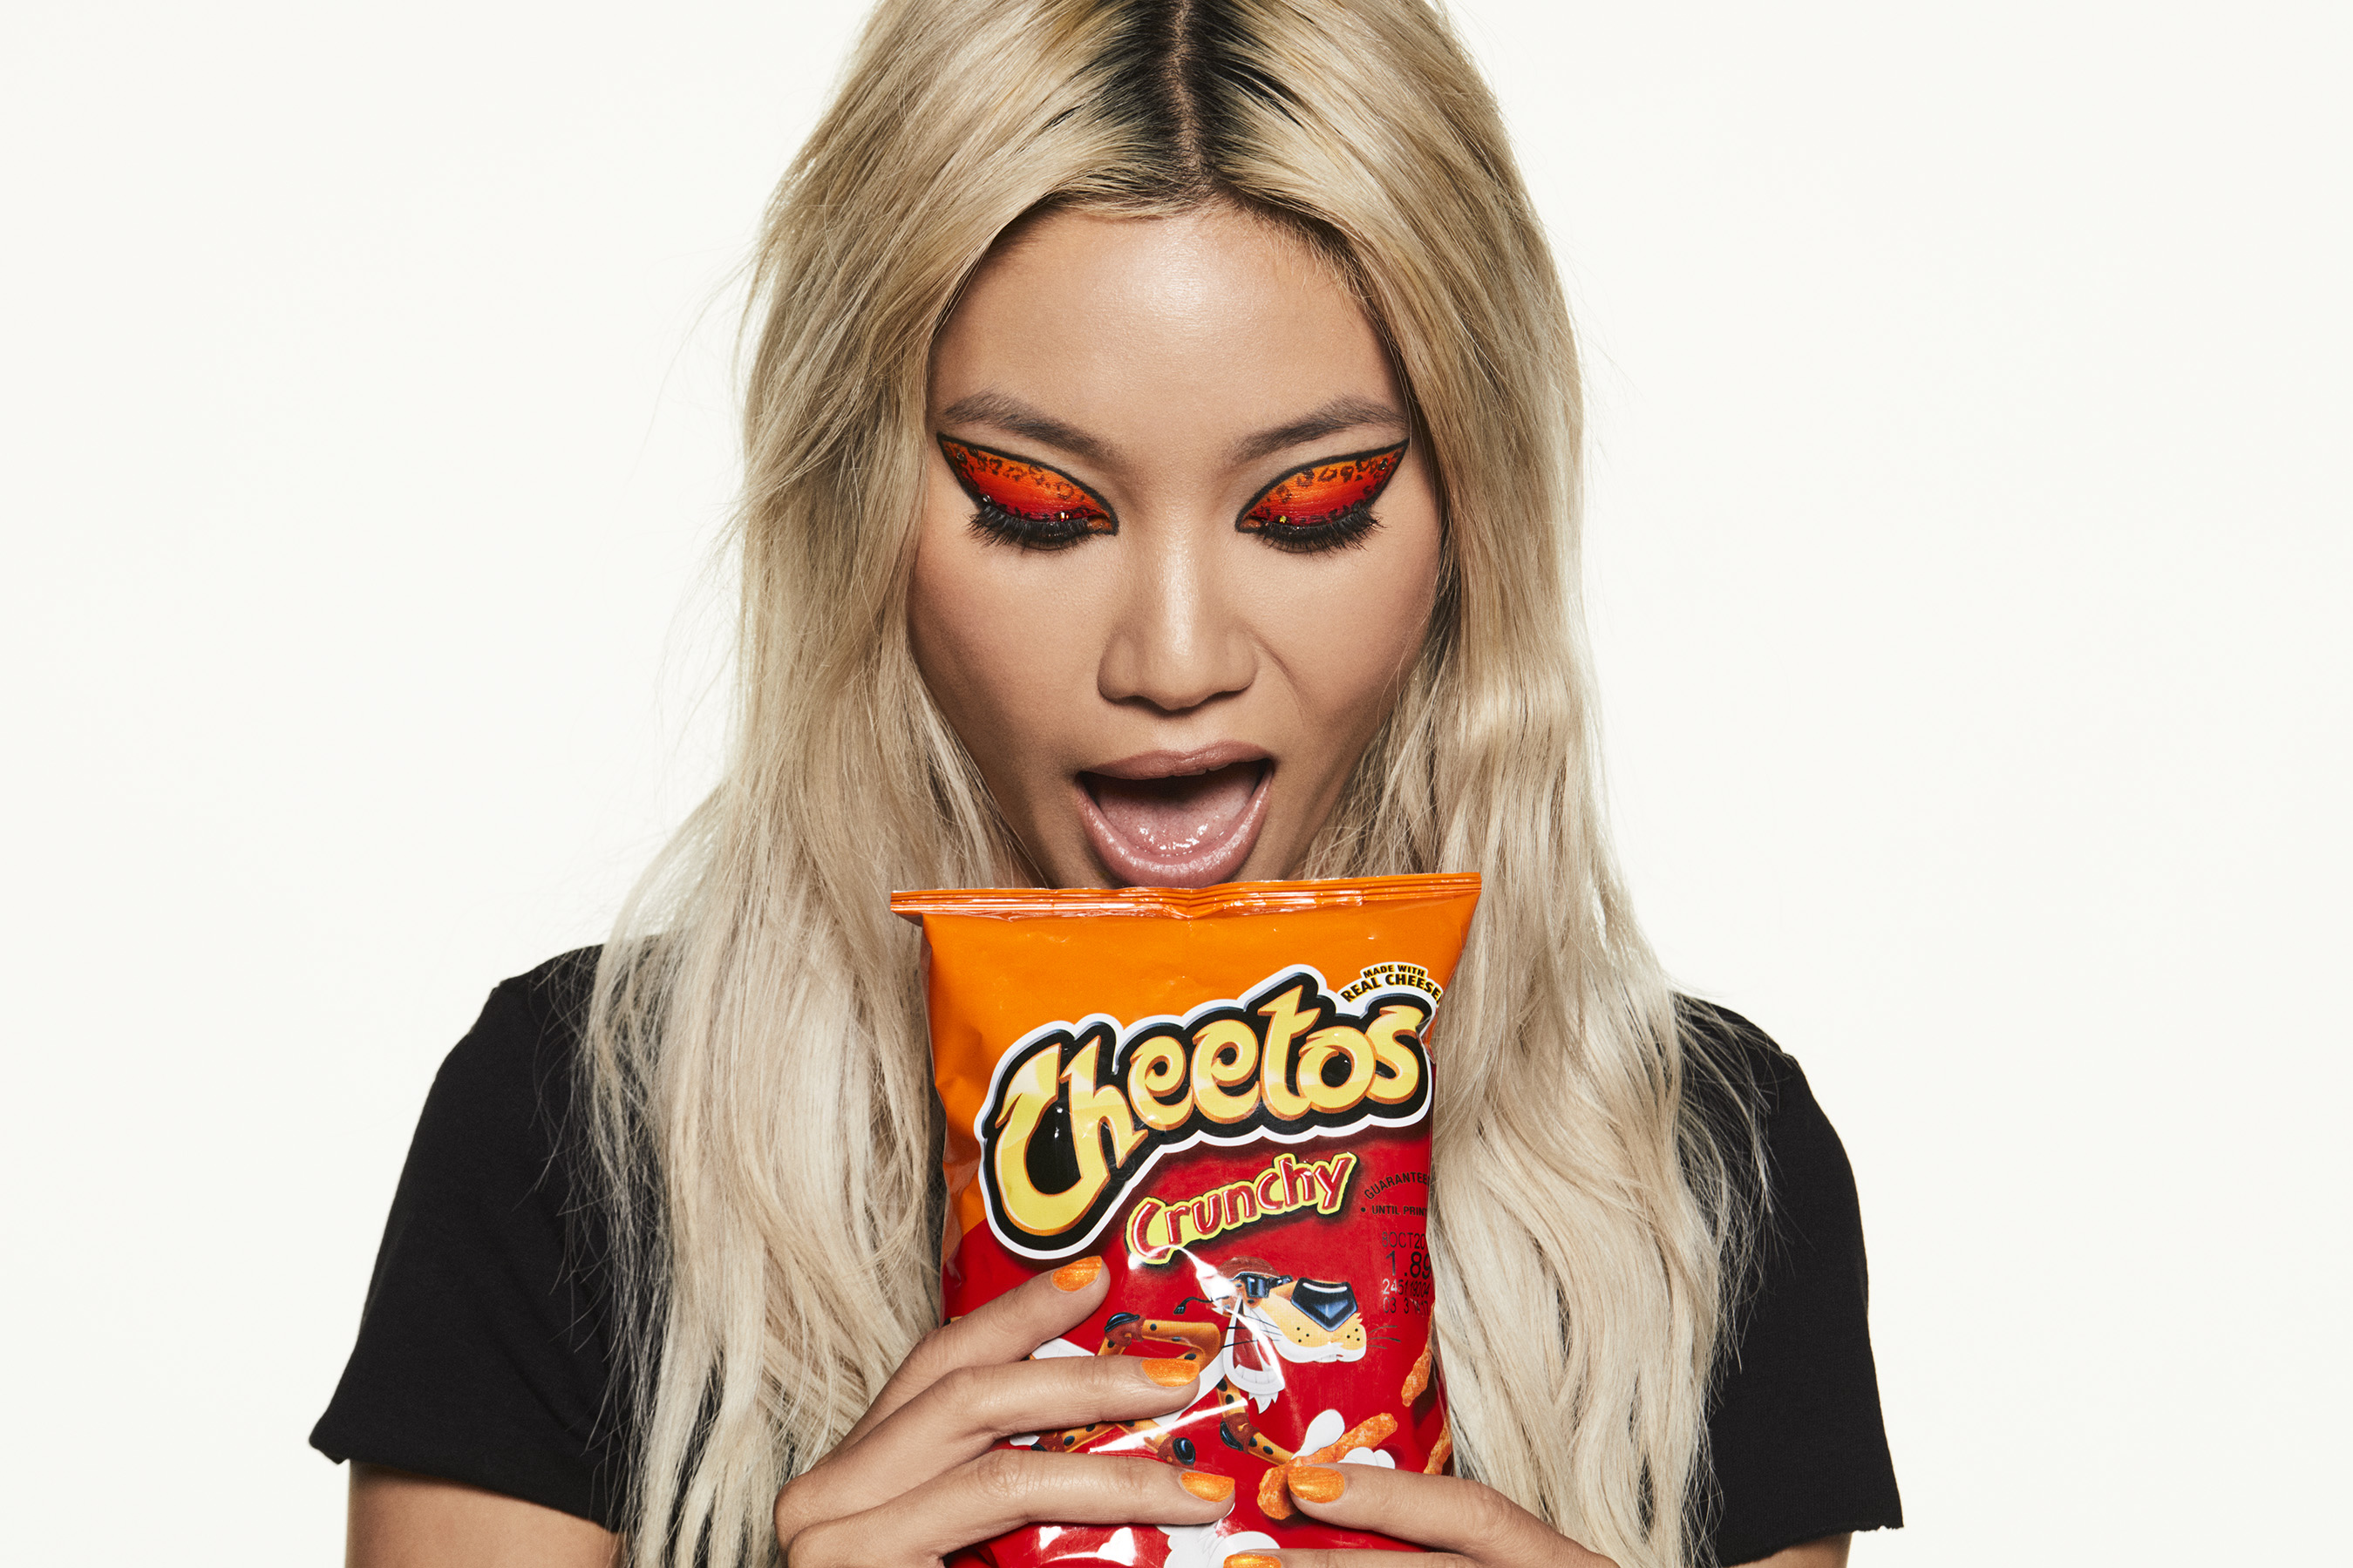 Cheetos puts its orange-dusted fingerprints all over fashion and beauty world with "House of Flamin' Haute"